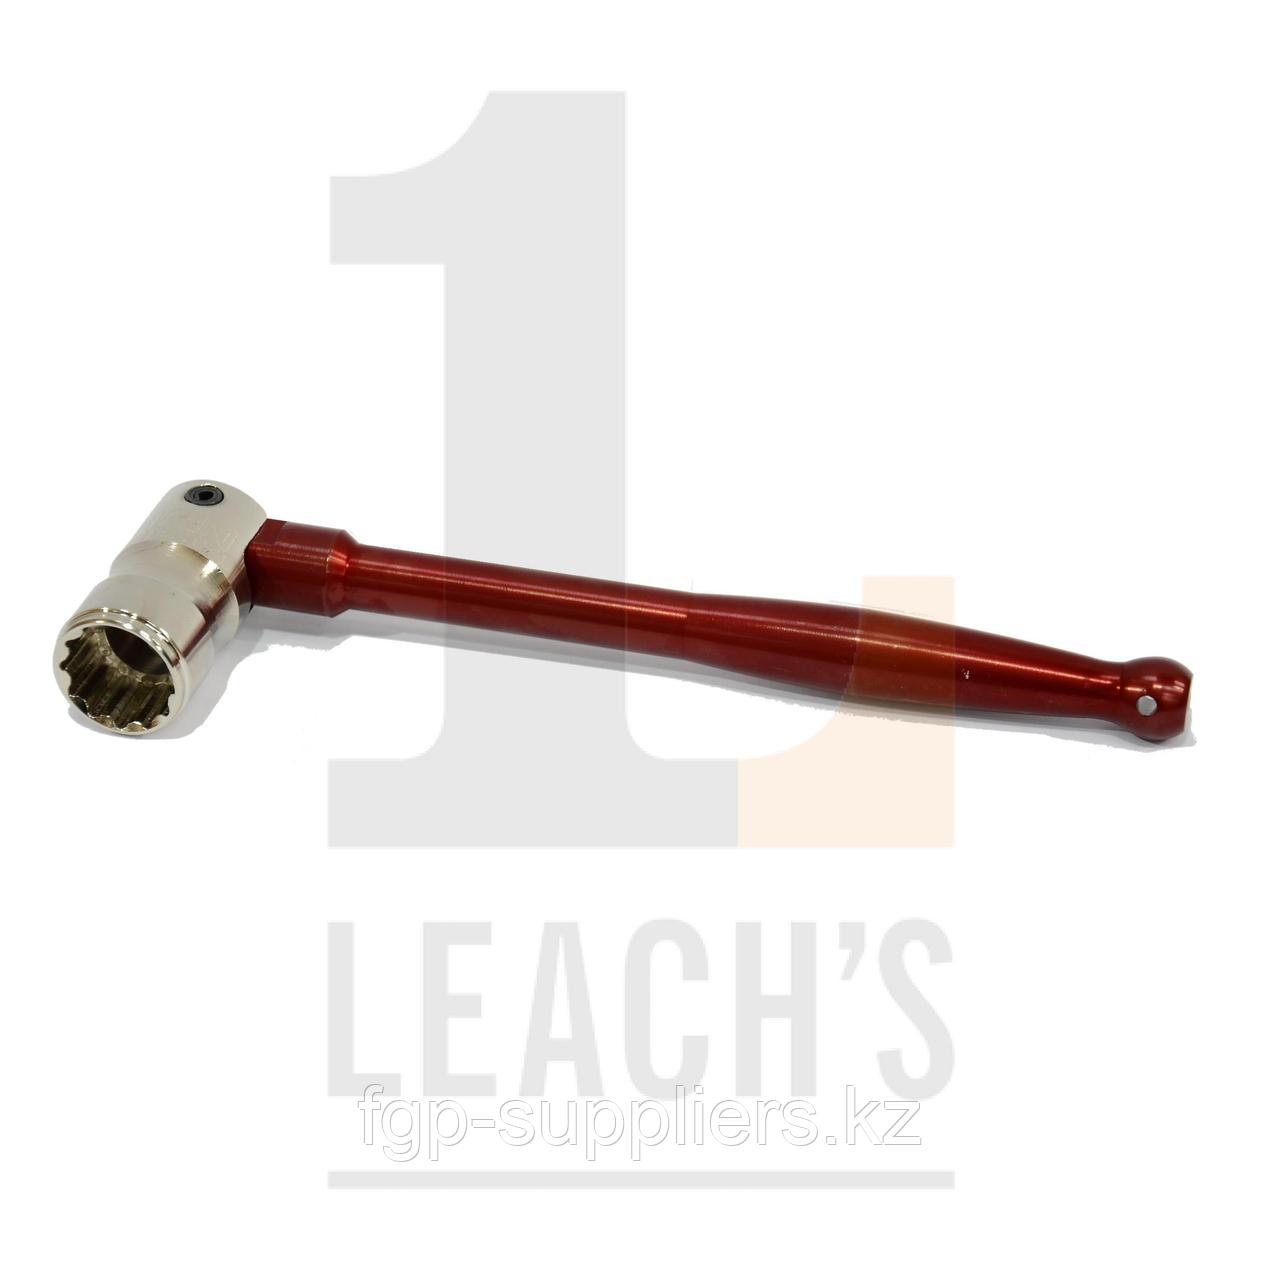 Coloured Whippet Spanner - 7/16" Leach's IMN Bi-Hex Steel Pinched Box with A.Alloy Red Metallic Handle / Цветной торцовый гаечный ключ 7/16 - фото 1 - id-p65537653